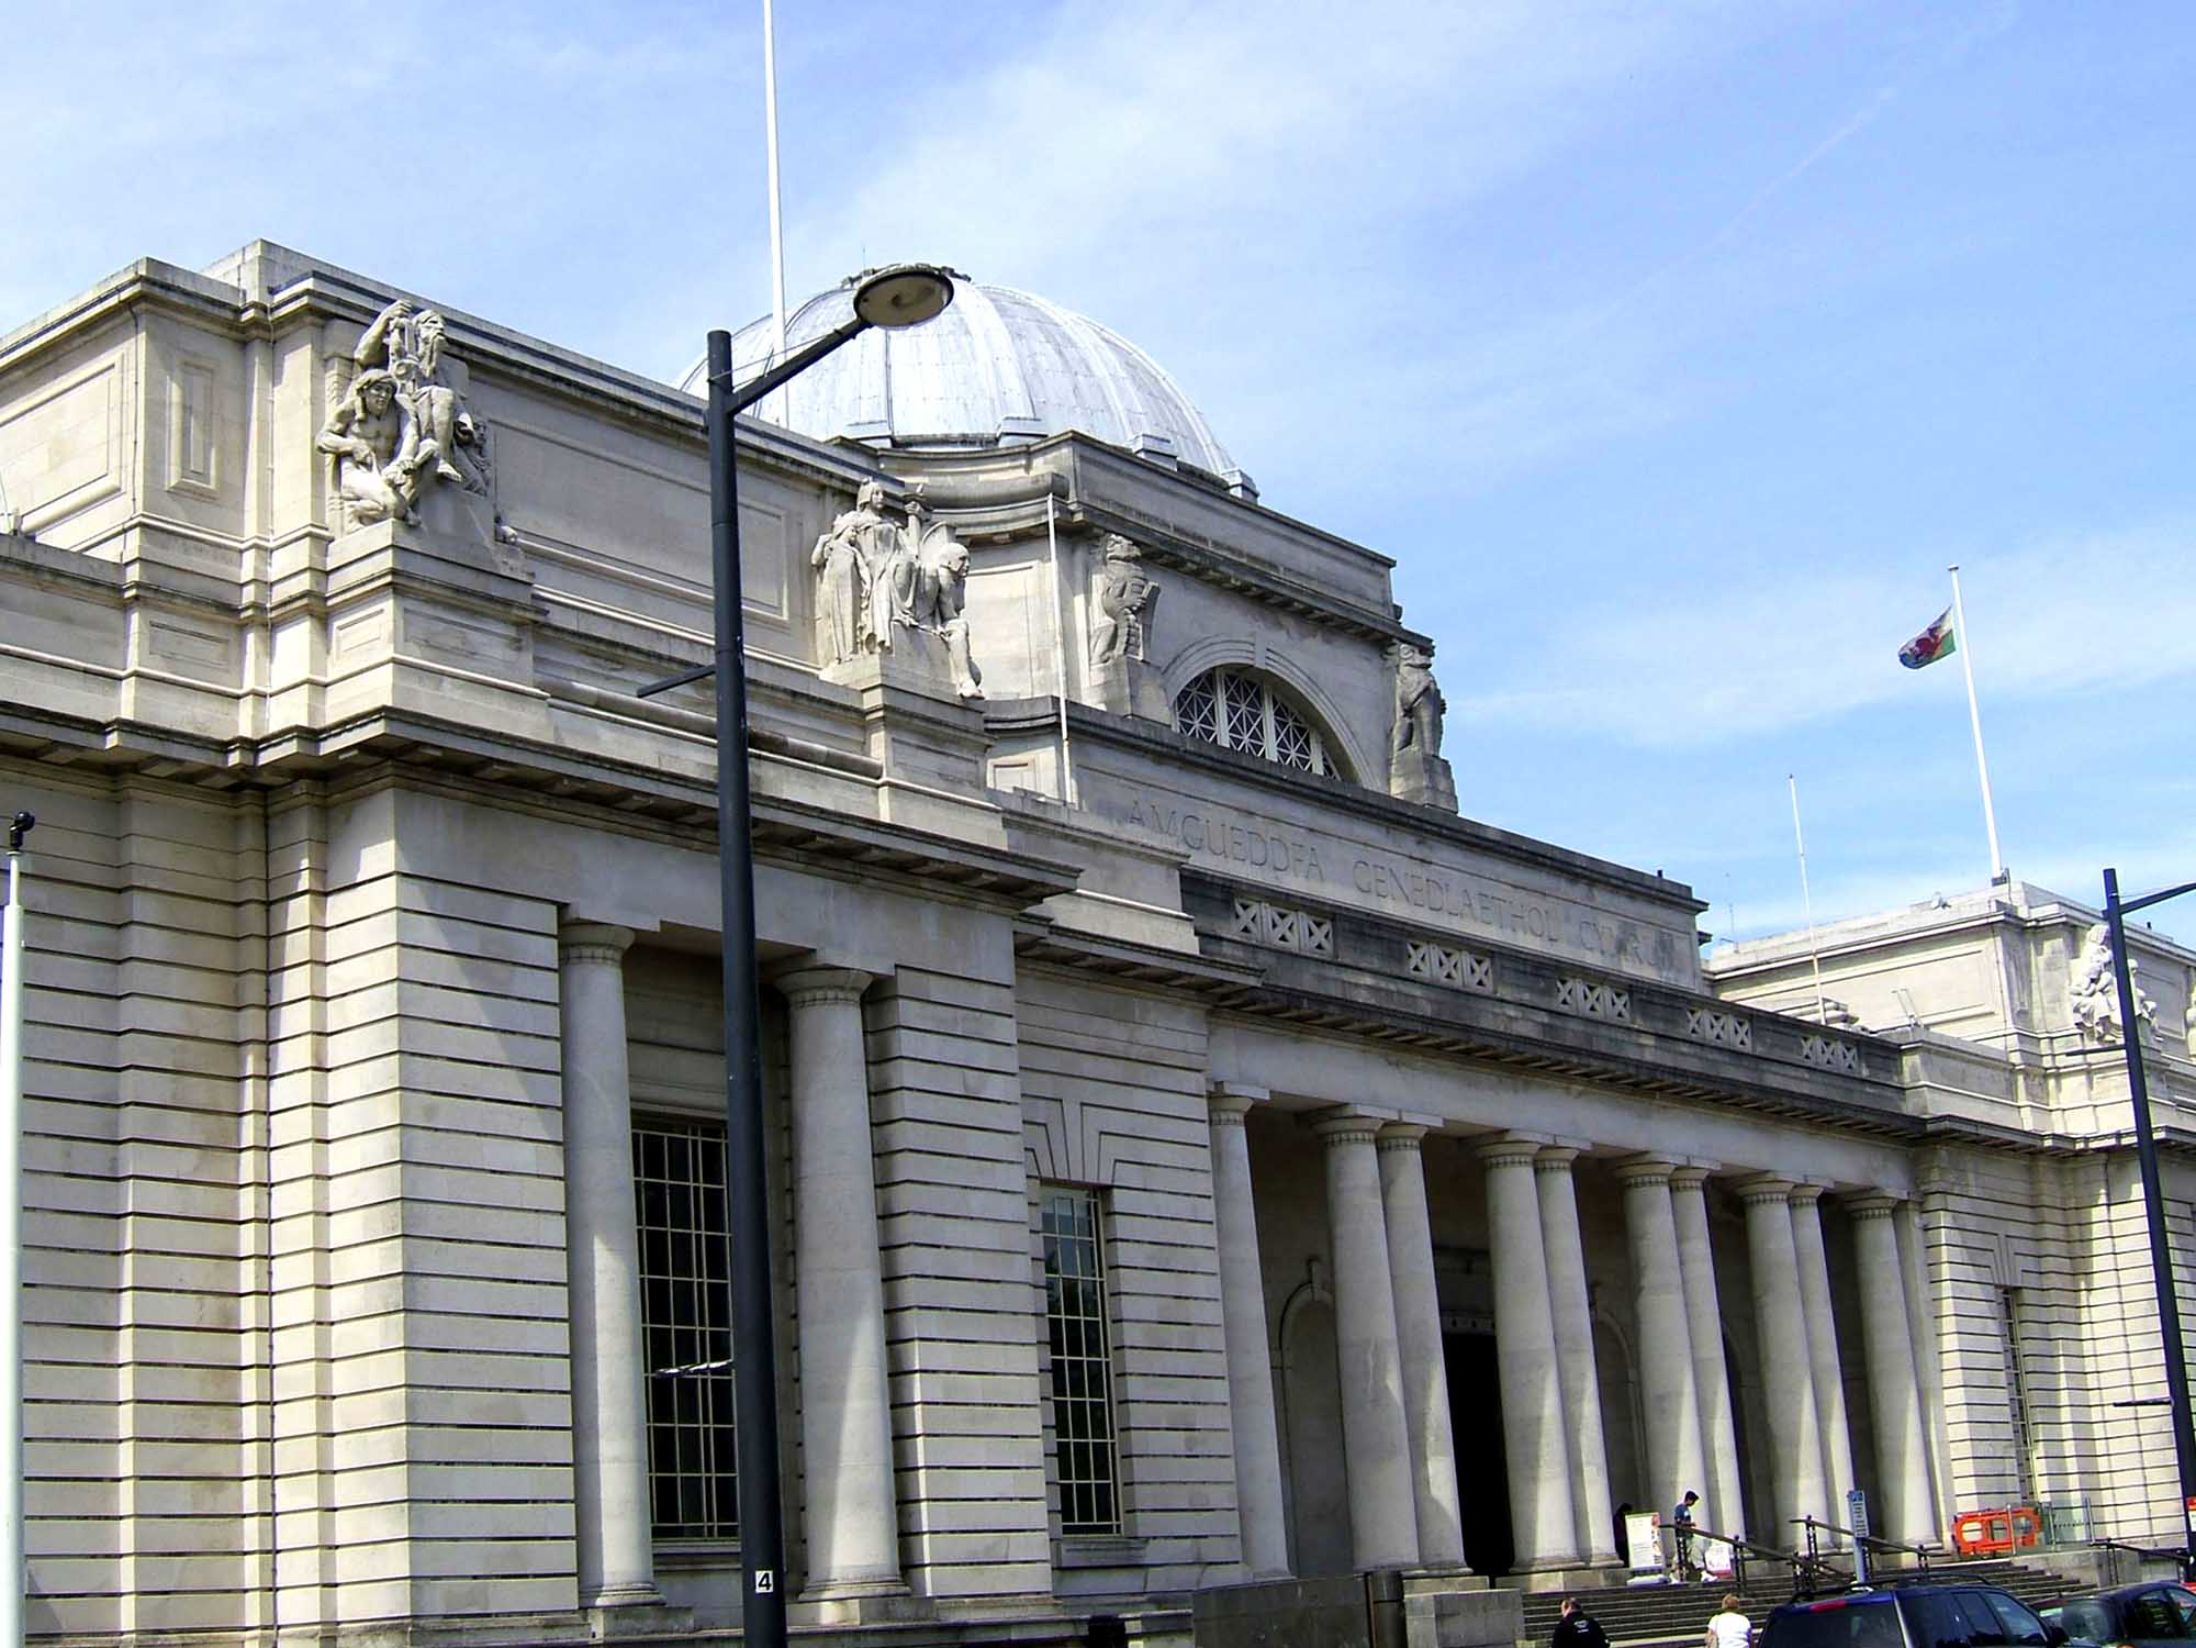 Things to do in Cardiff - National Museum Cardiff